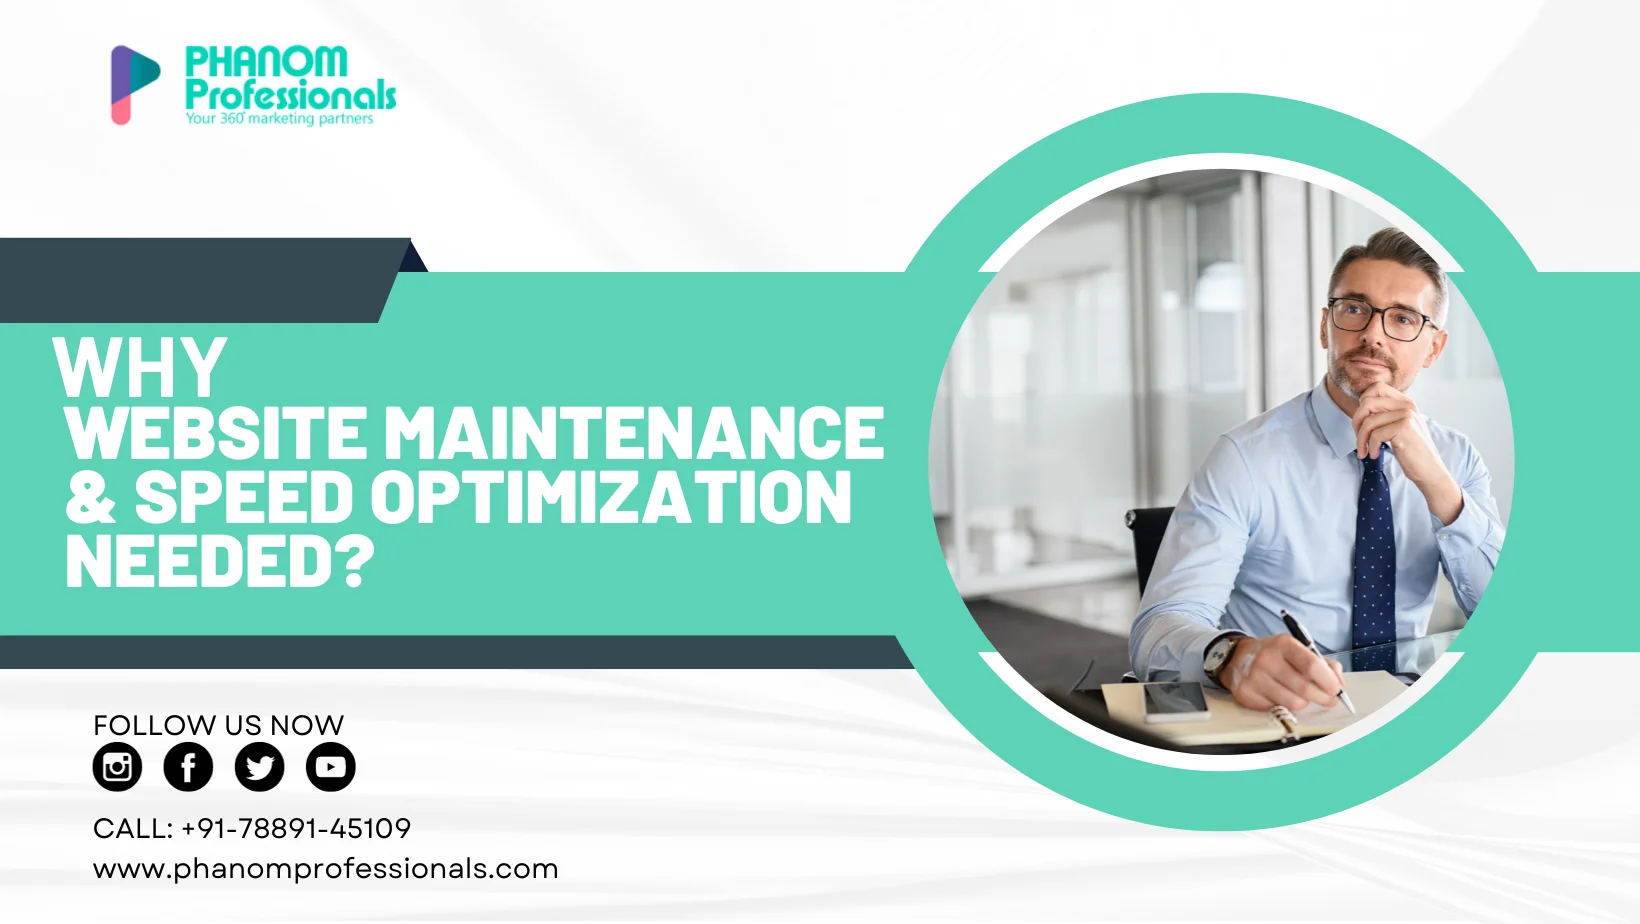 Is Website Maintenance & Speed Optimization Important for Your Business?